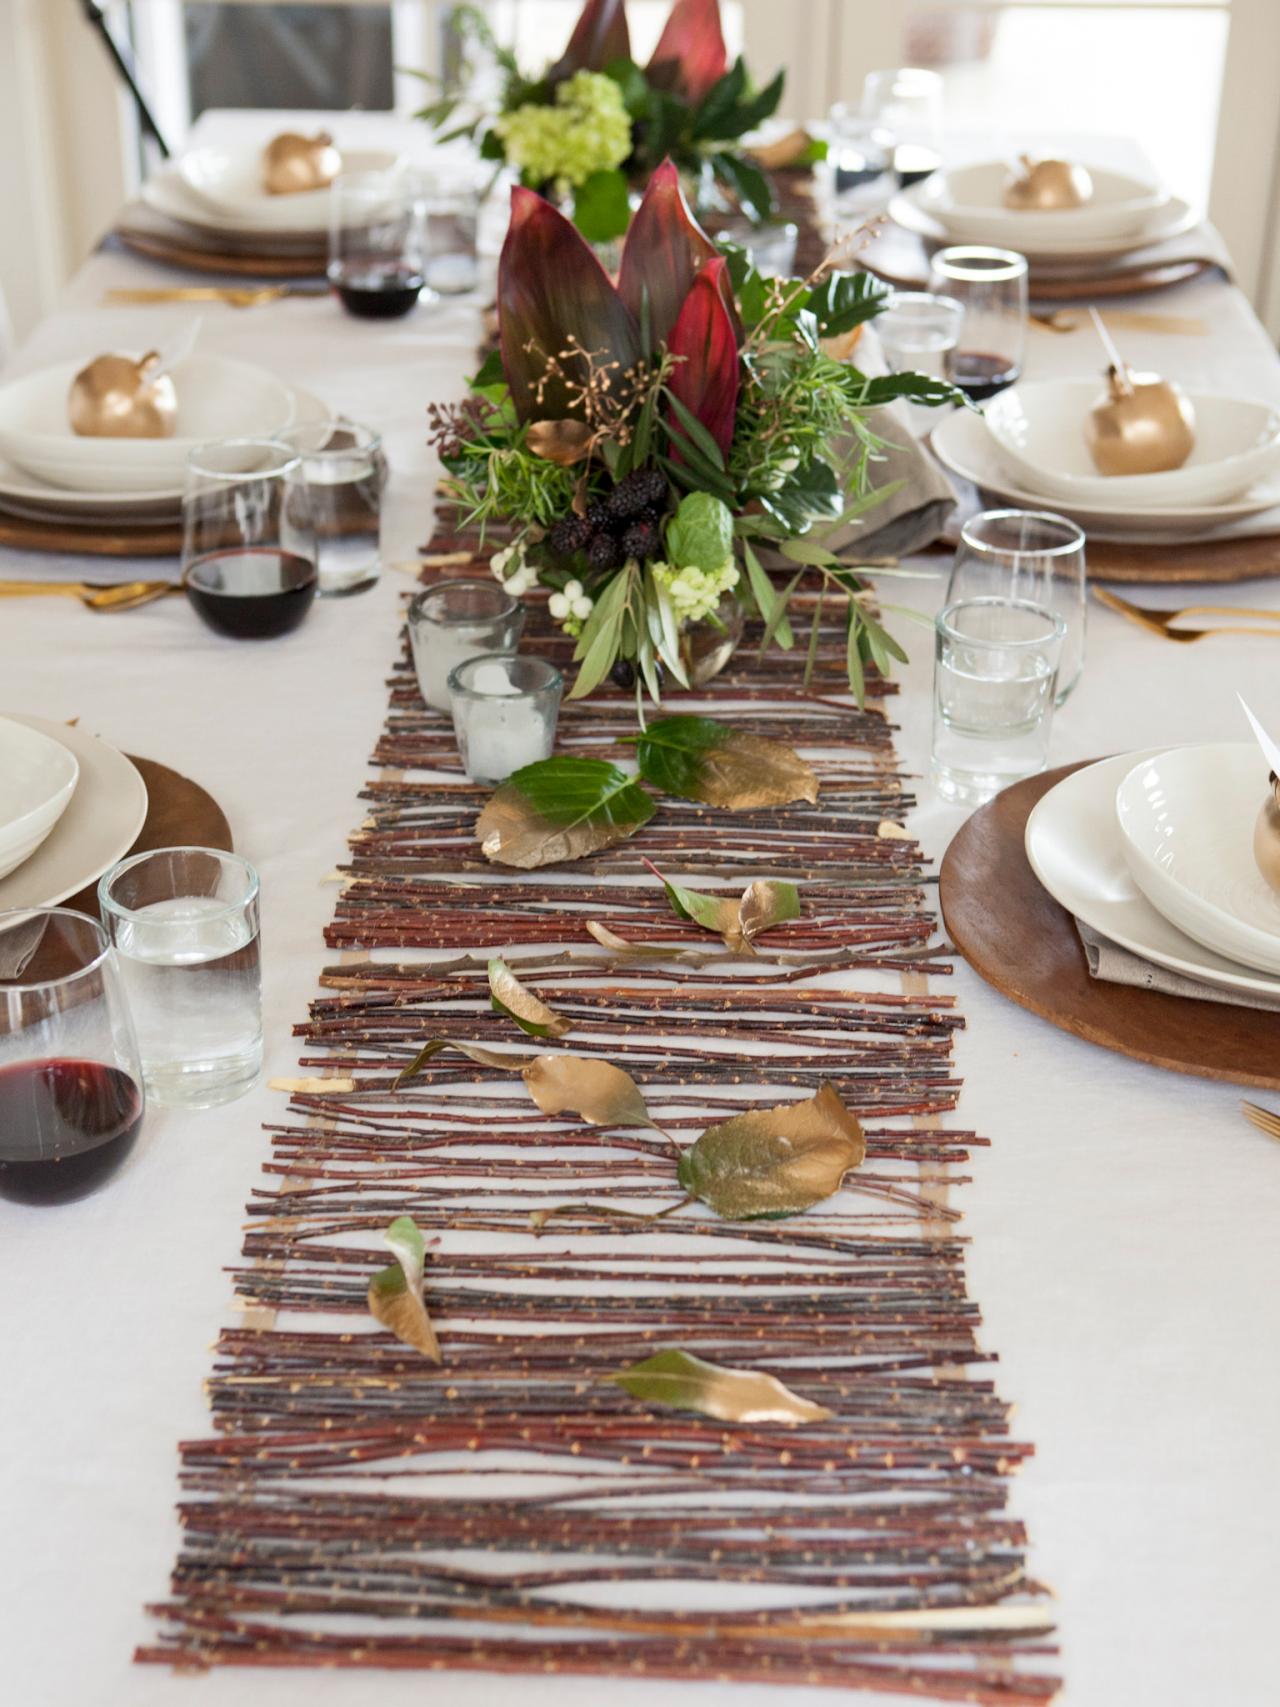 runner making table bring your  table wedding organic table twig touch your an runner to own  thanksgiving